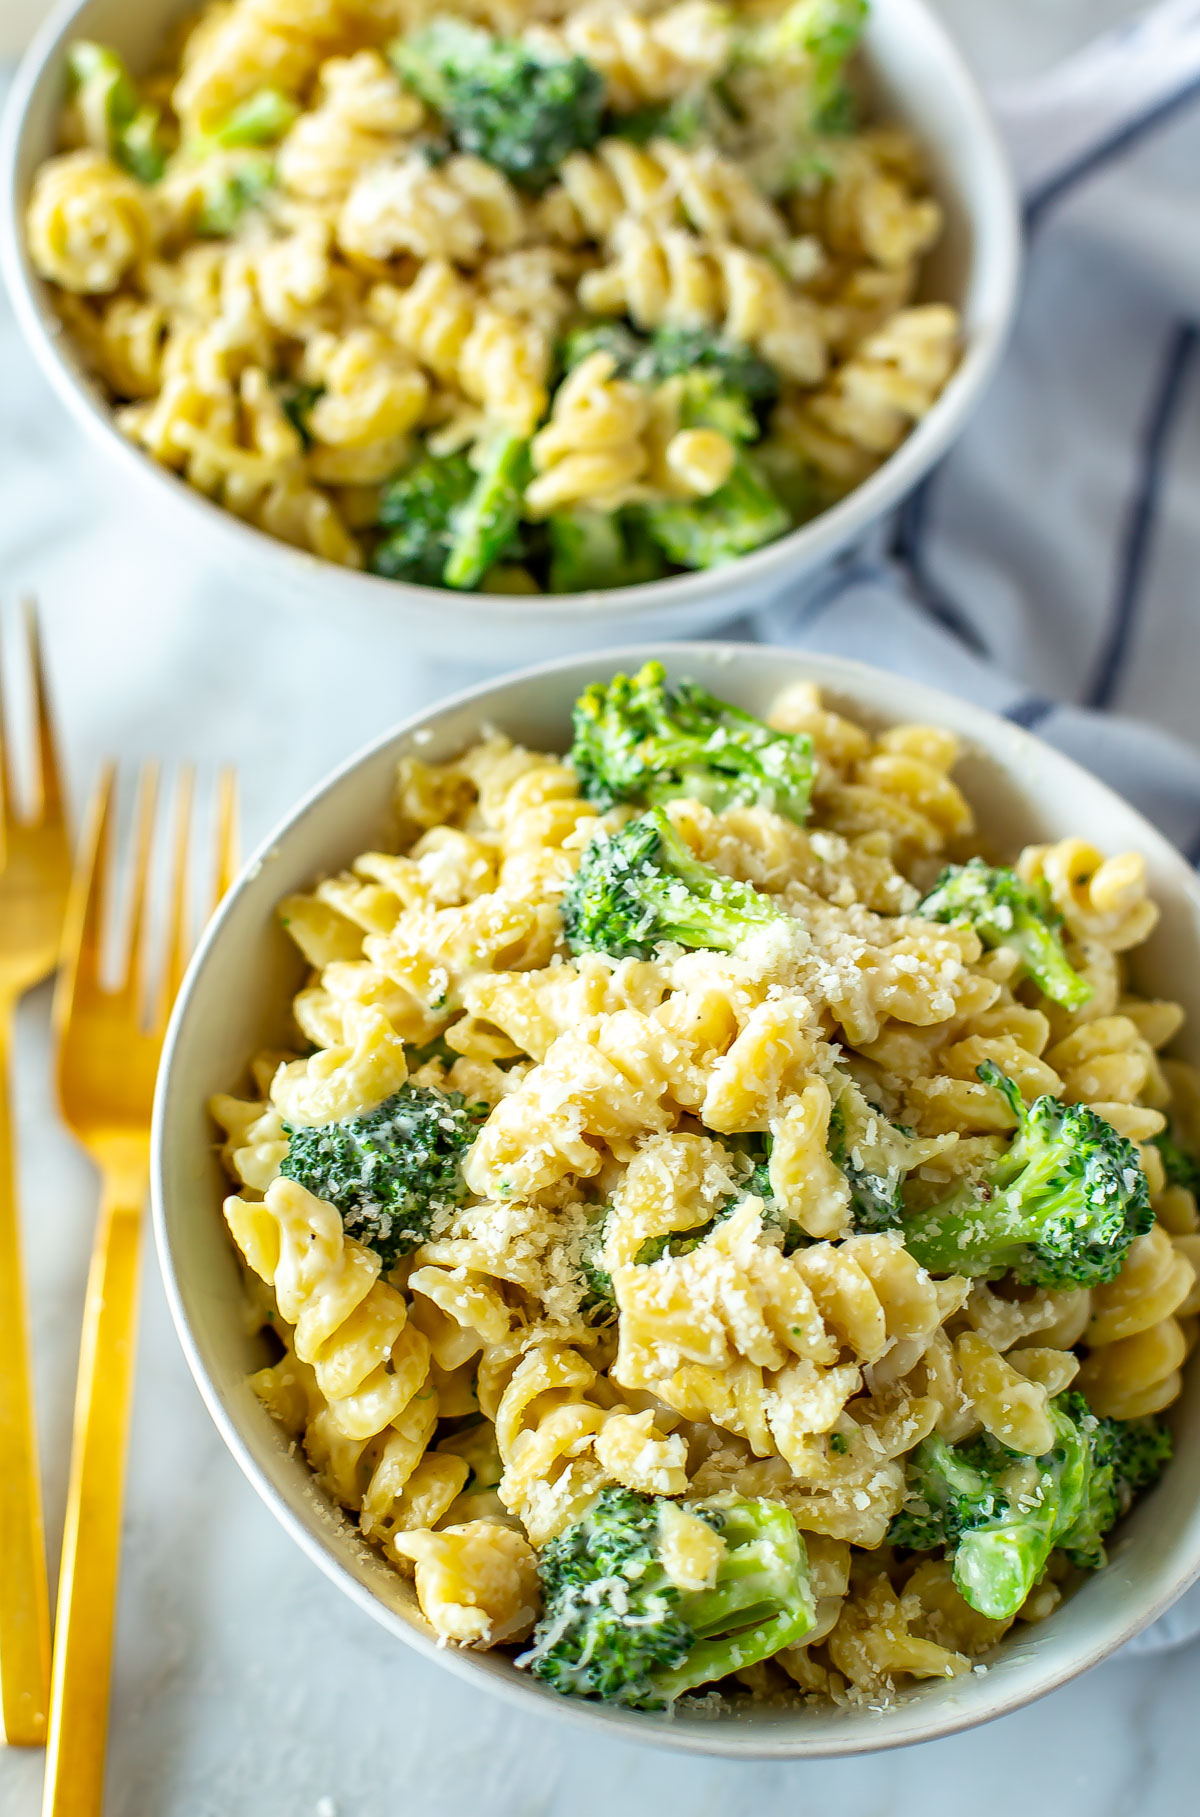 A close-up of two bowls of broccoli alfredo pasta.